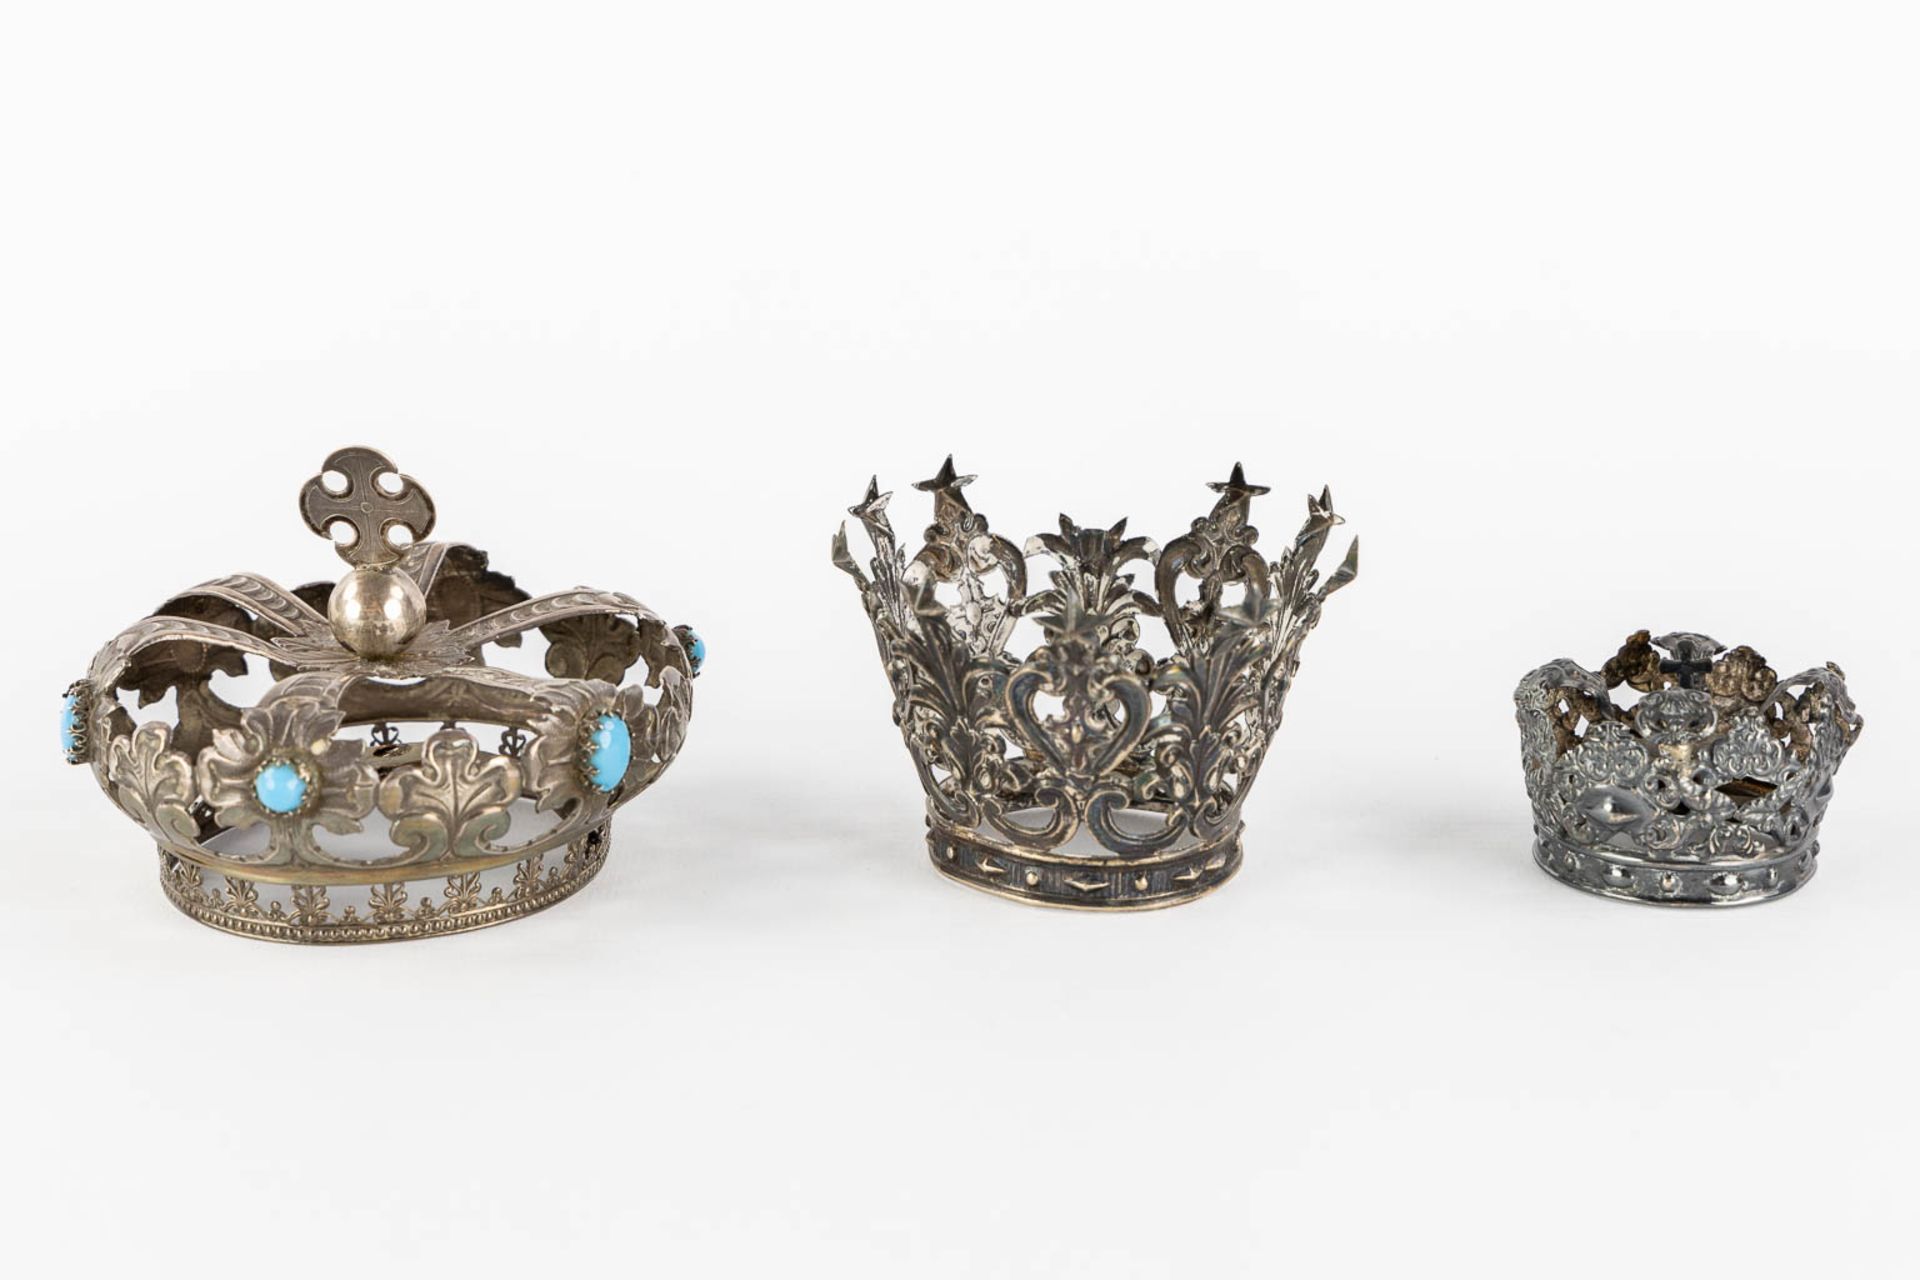 4 silver crowns and a sceptre, added a fabric crown. 211g. (L:33,5 cm) - Image 5 of 8